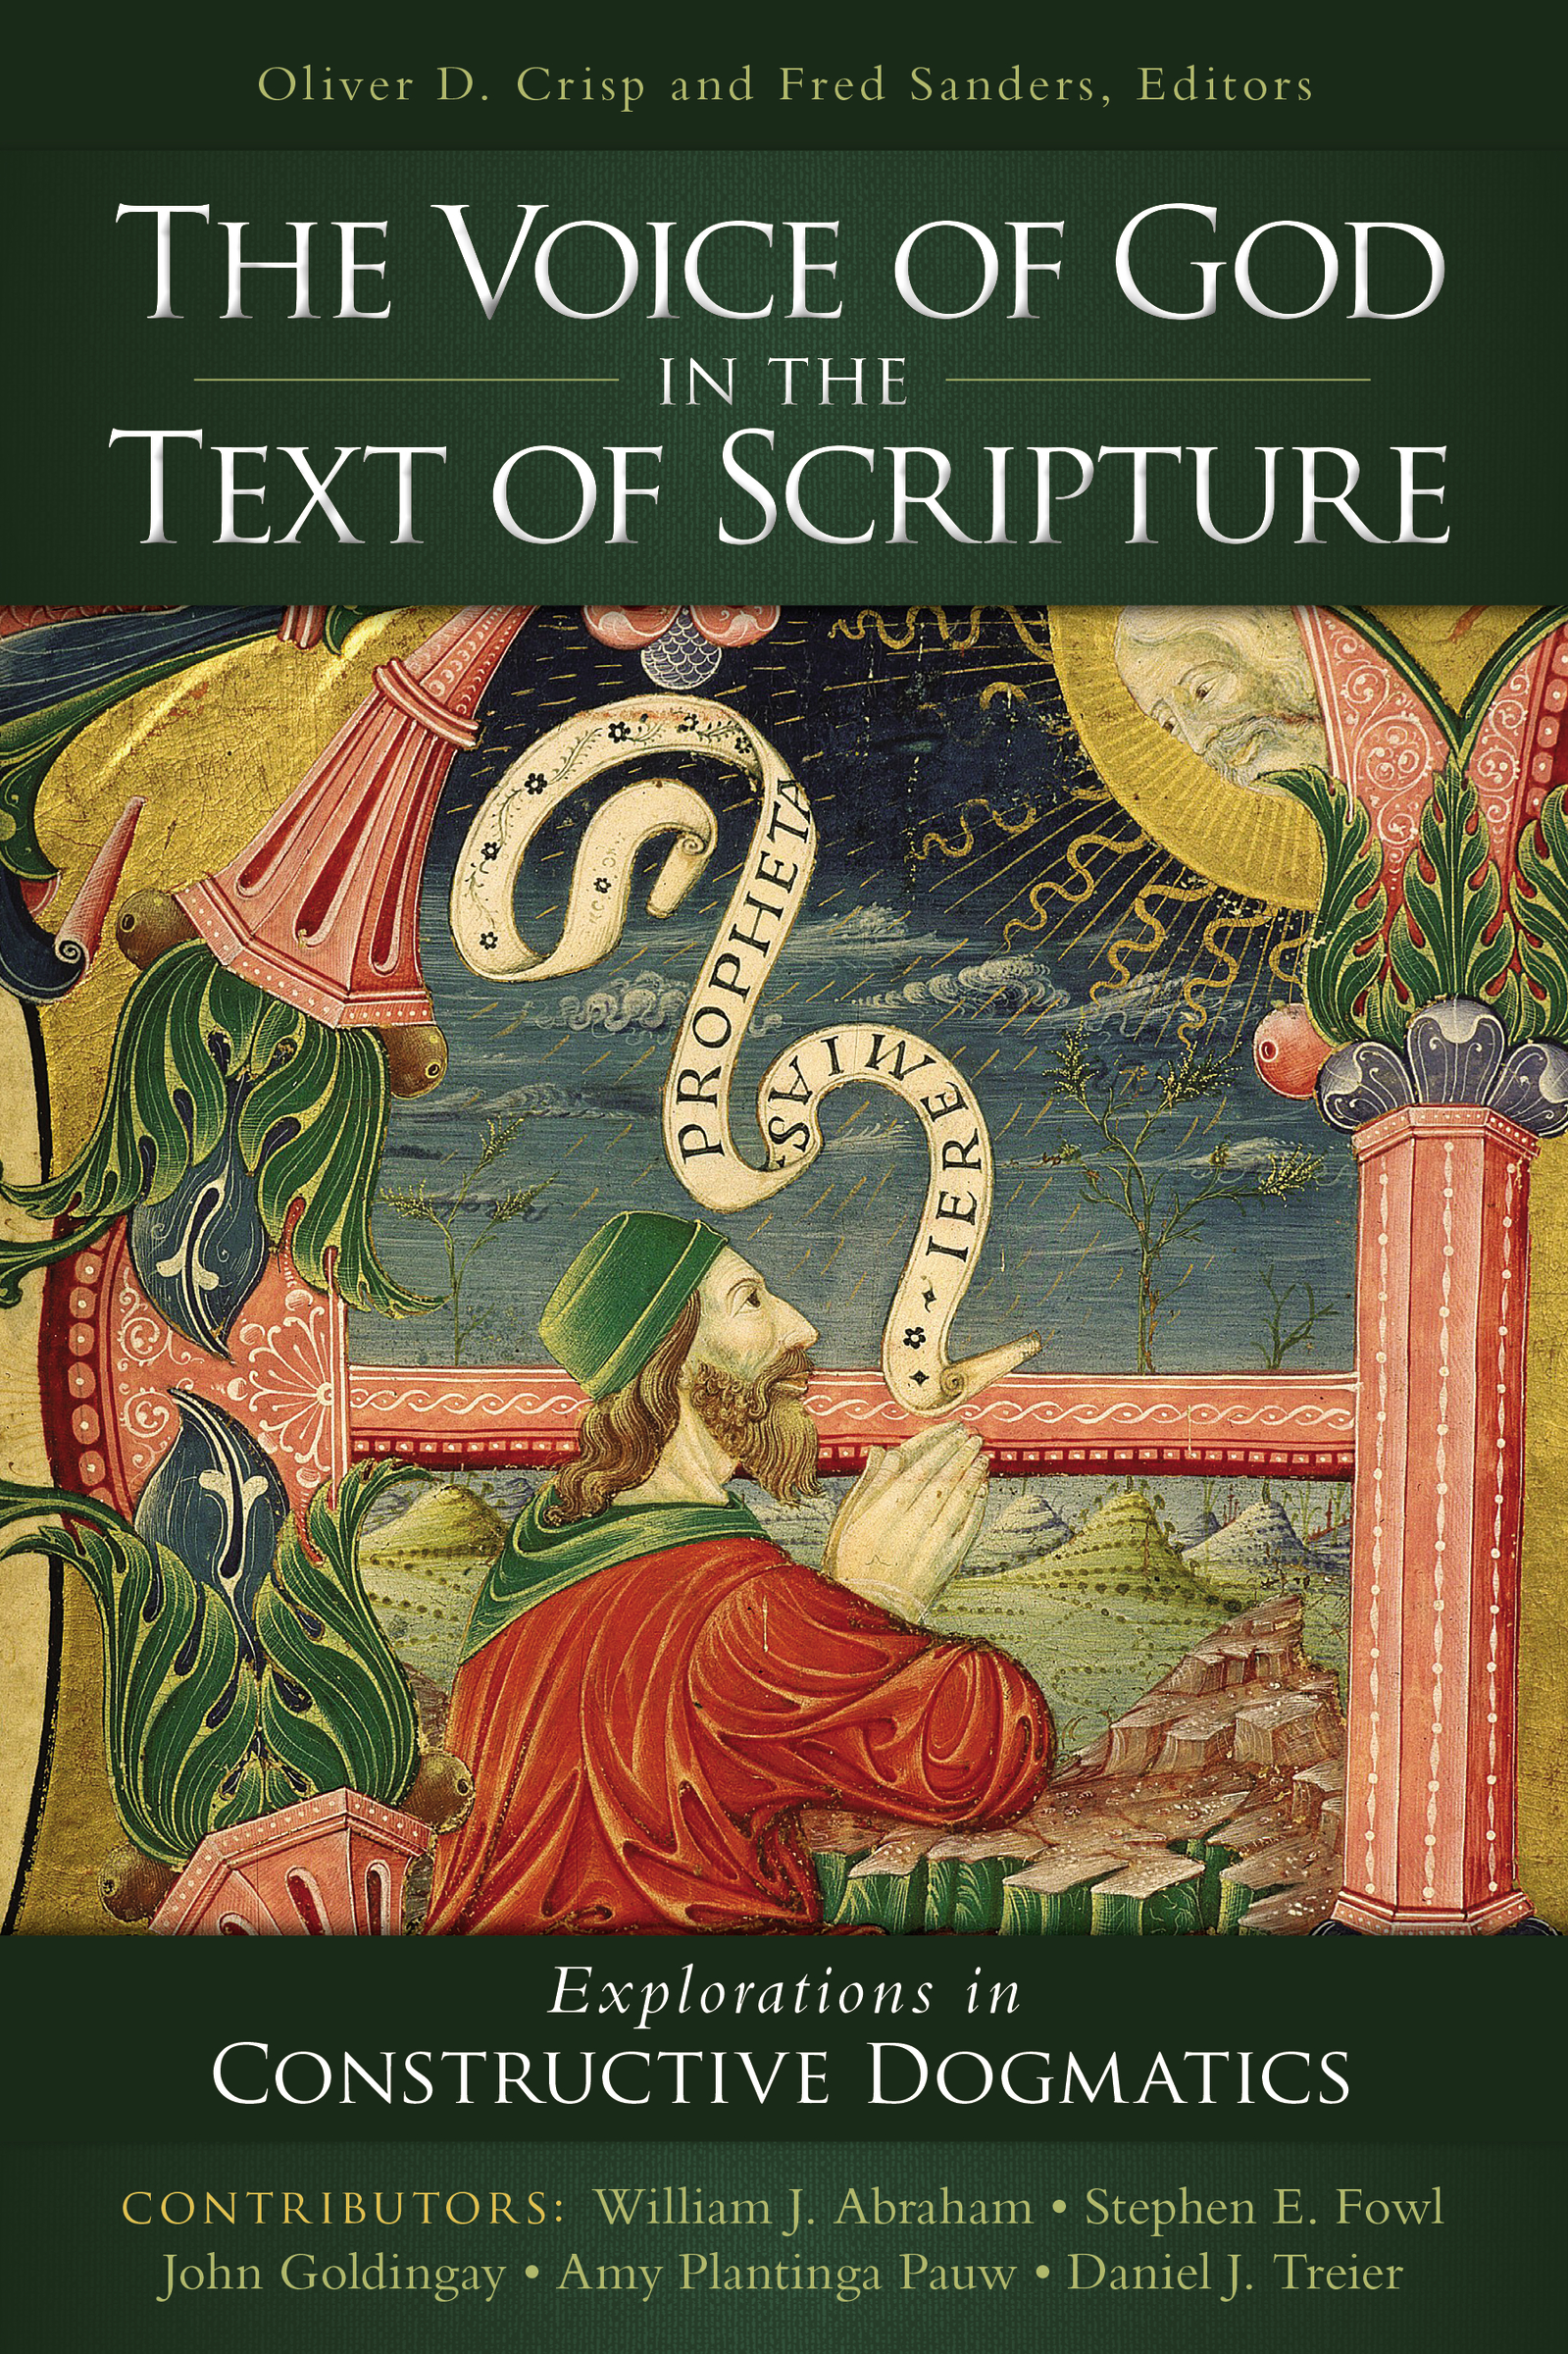 The Voice of God in the Text of Scripture